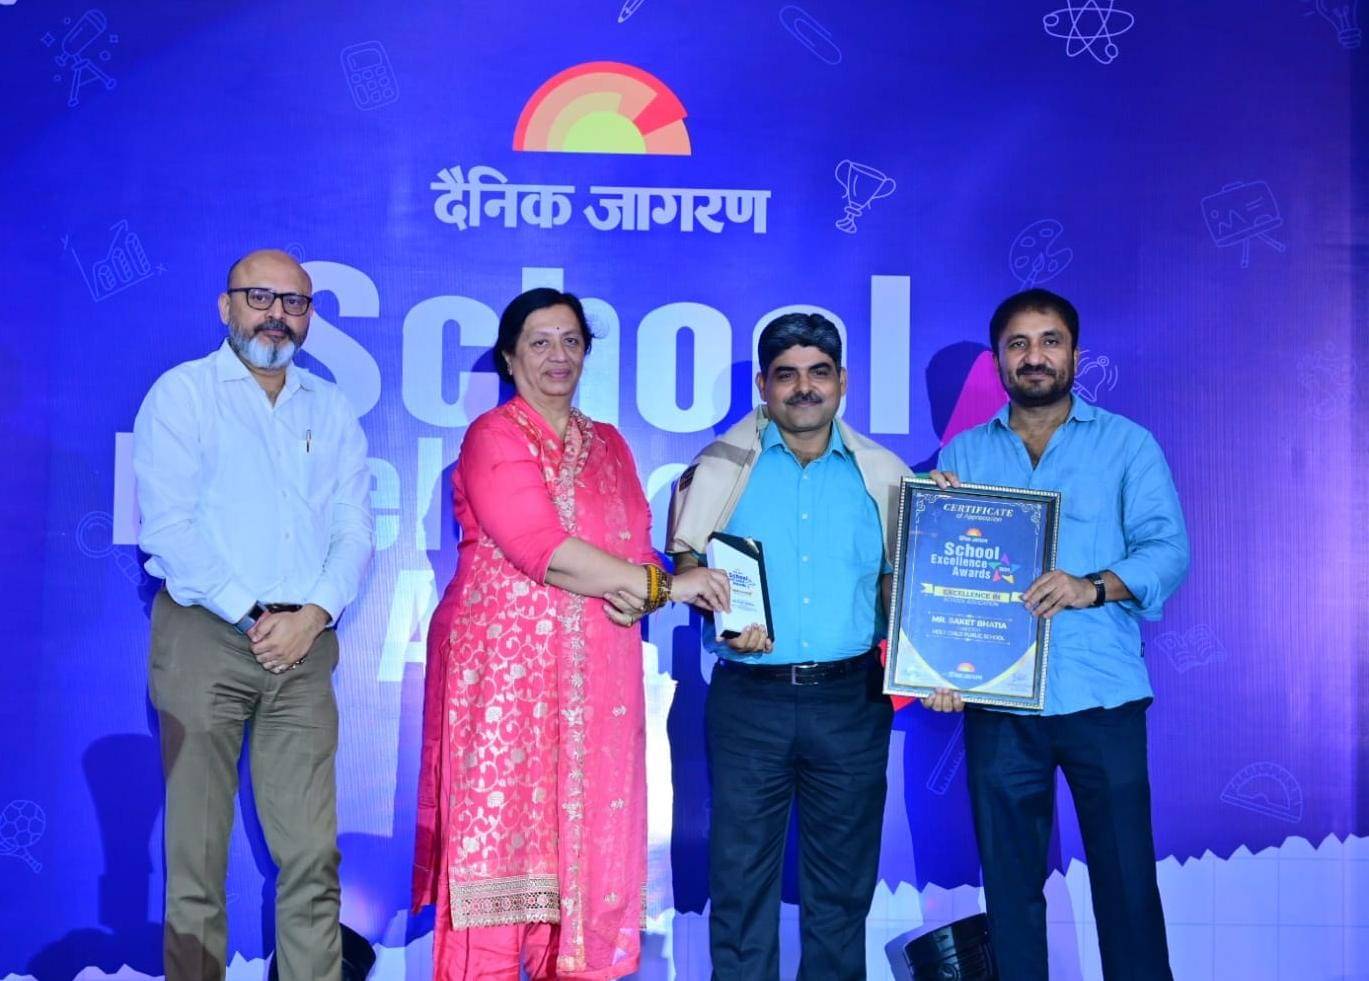 Award for Excellence in Education by Smt. Seema Trikha